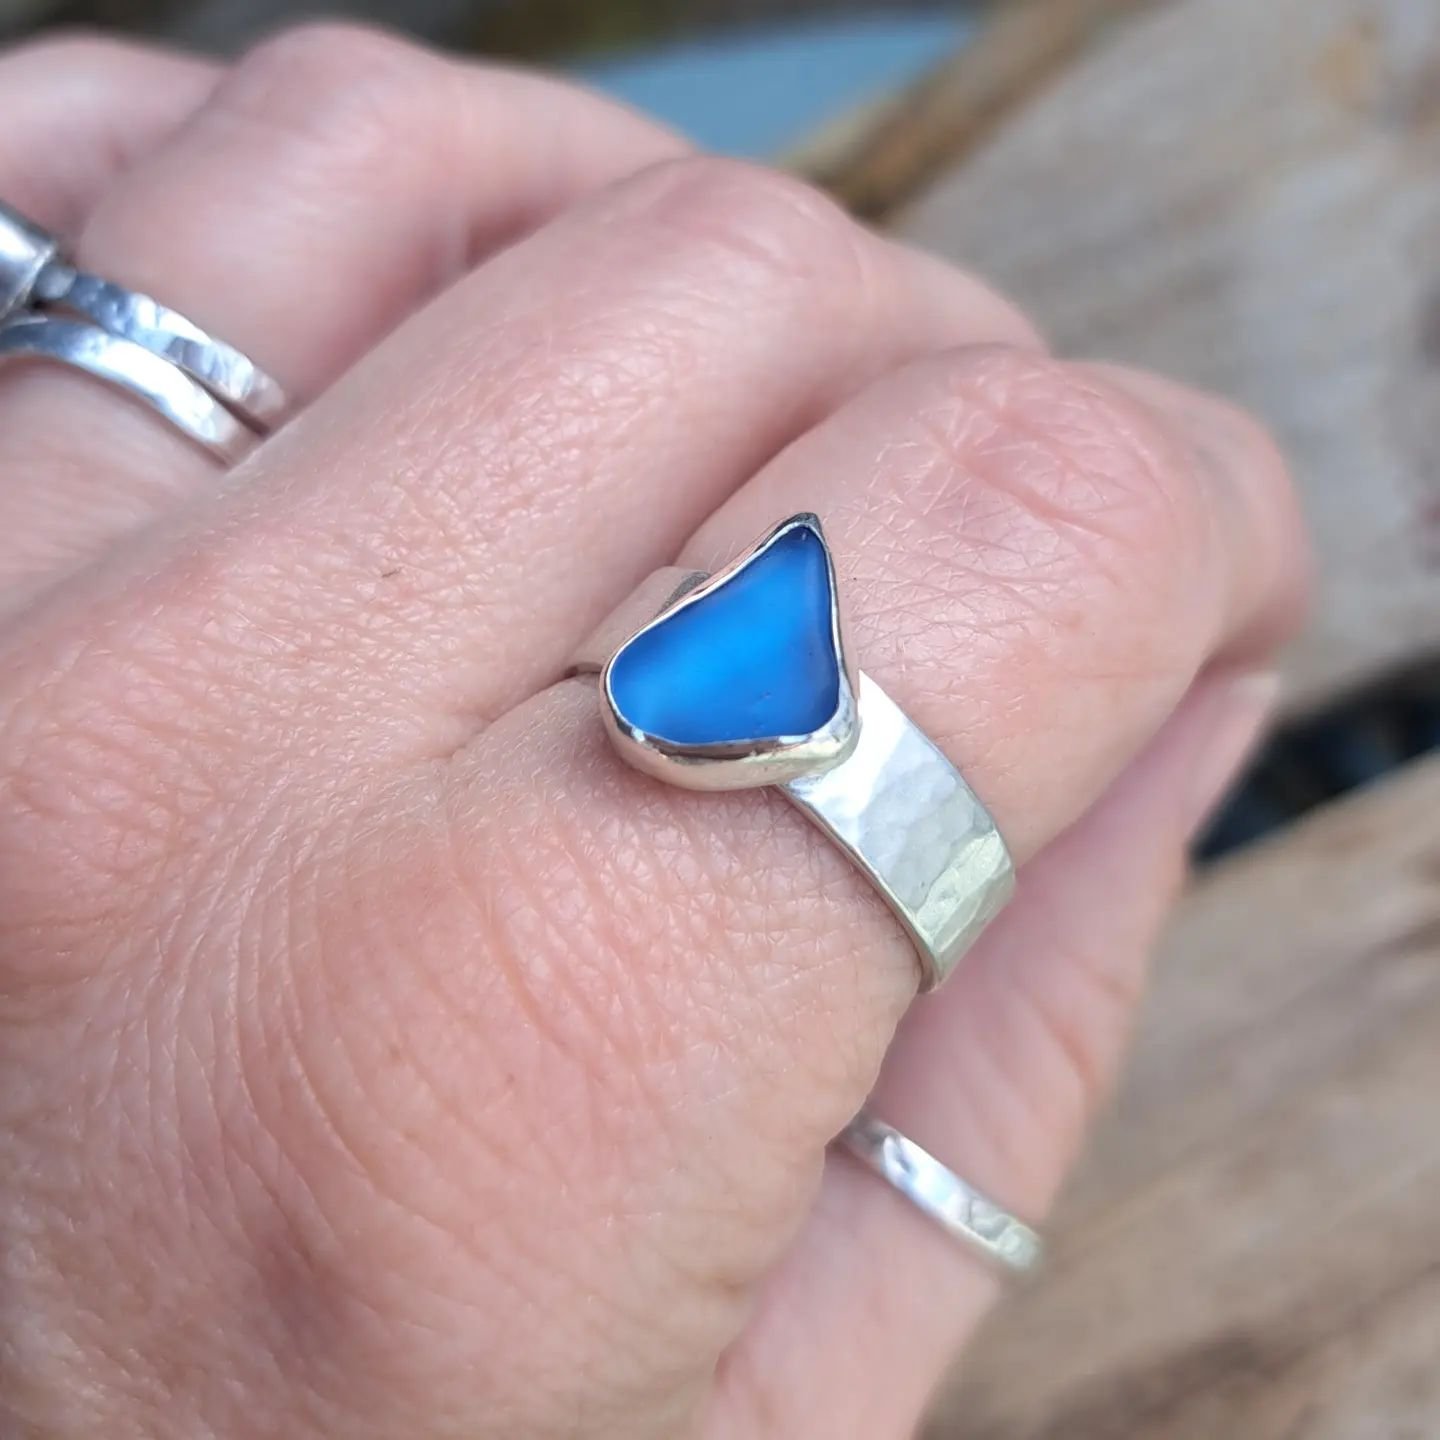 This cobalt blue sea glass ring finally made its way to its lovely new owner this week. It was one of those projects that seemed not to want to go smoothly. Having to remake bezels is a very frustrating task! I was happy to finally hand it over, look